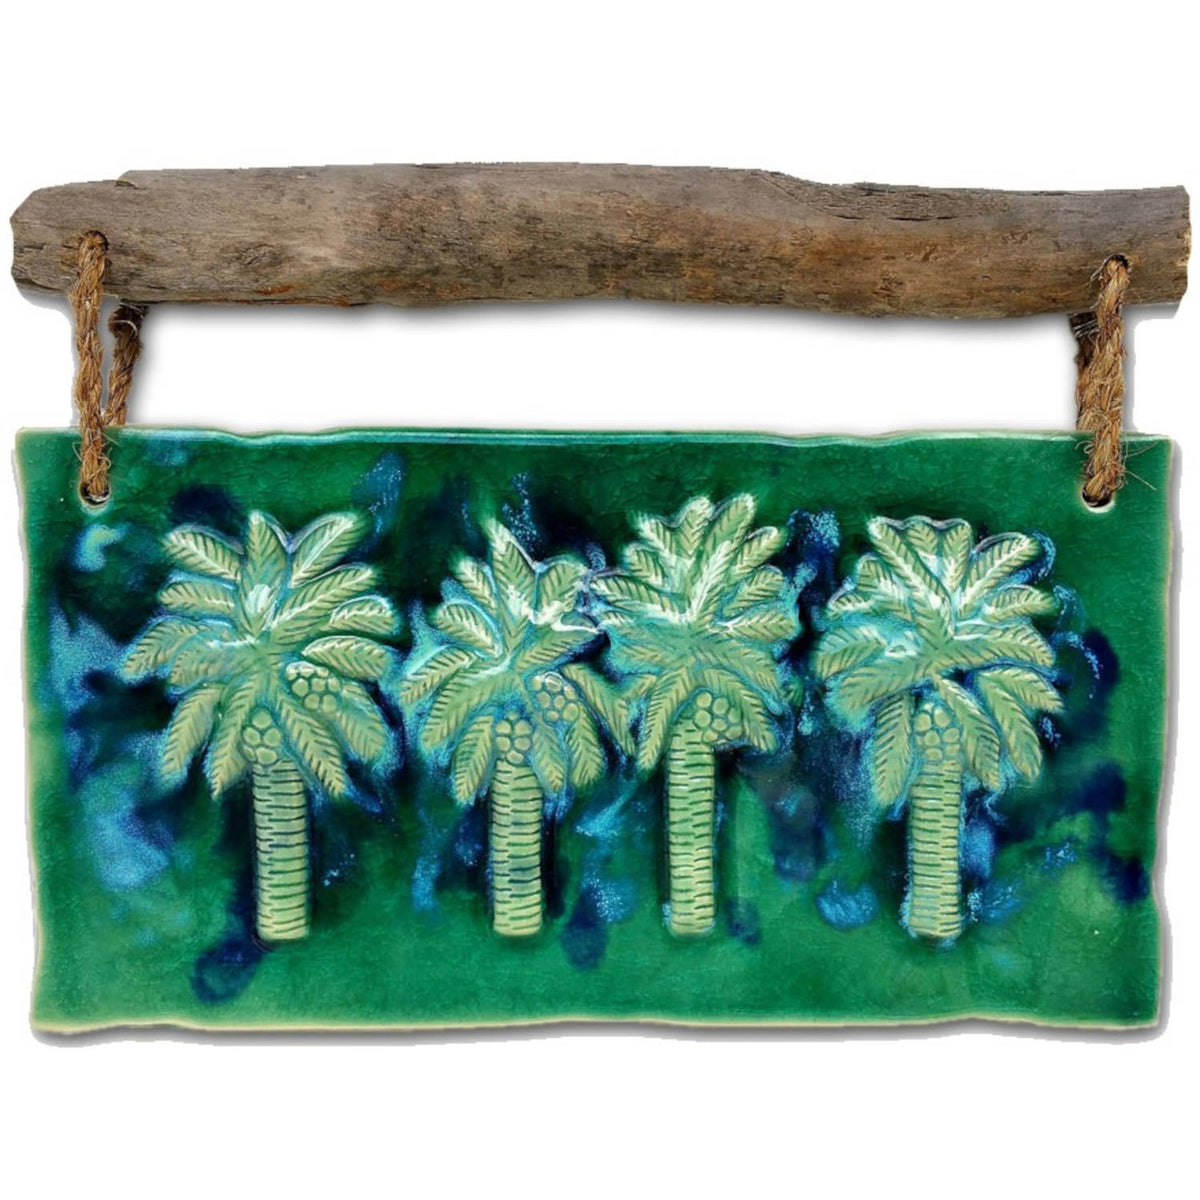 Ceramic Green Palm Tree Decorative Wall Artwork with driftwood, can use Indoors or Outdoors